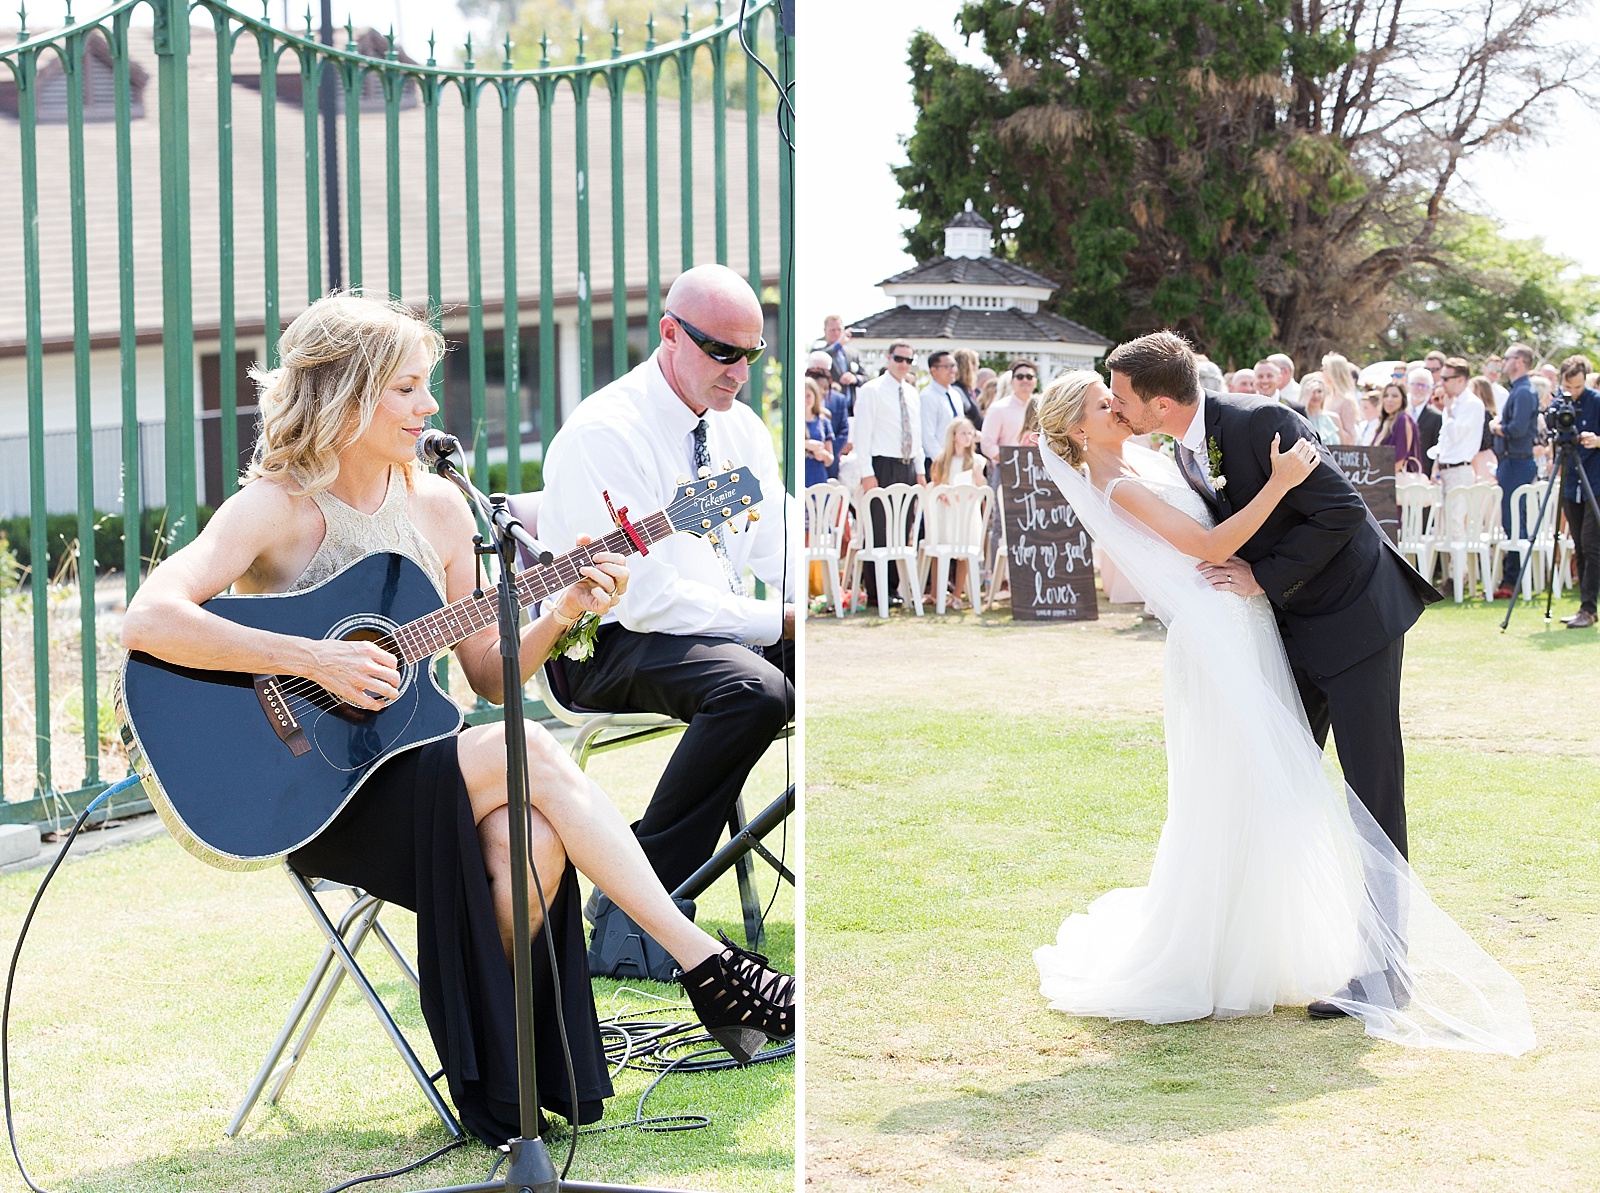 outdoor wedding ceremony details photographed by Randi Michelle Photography